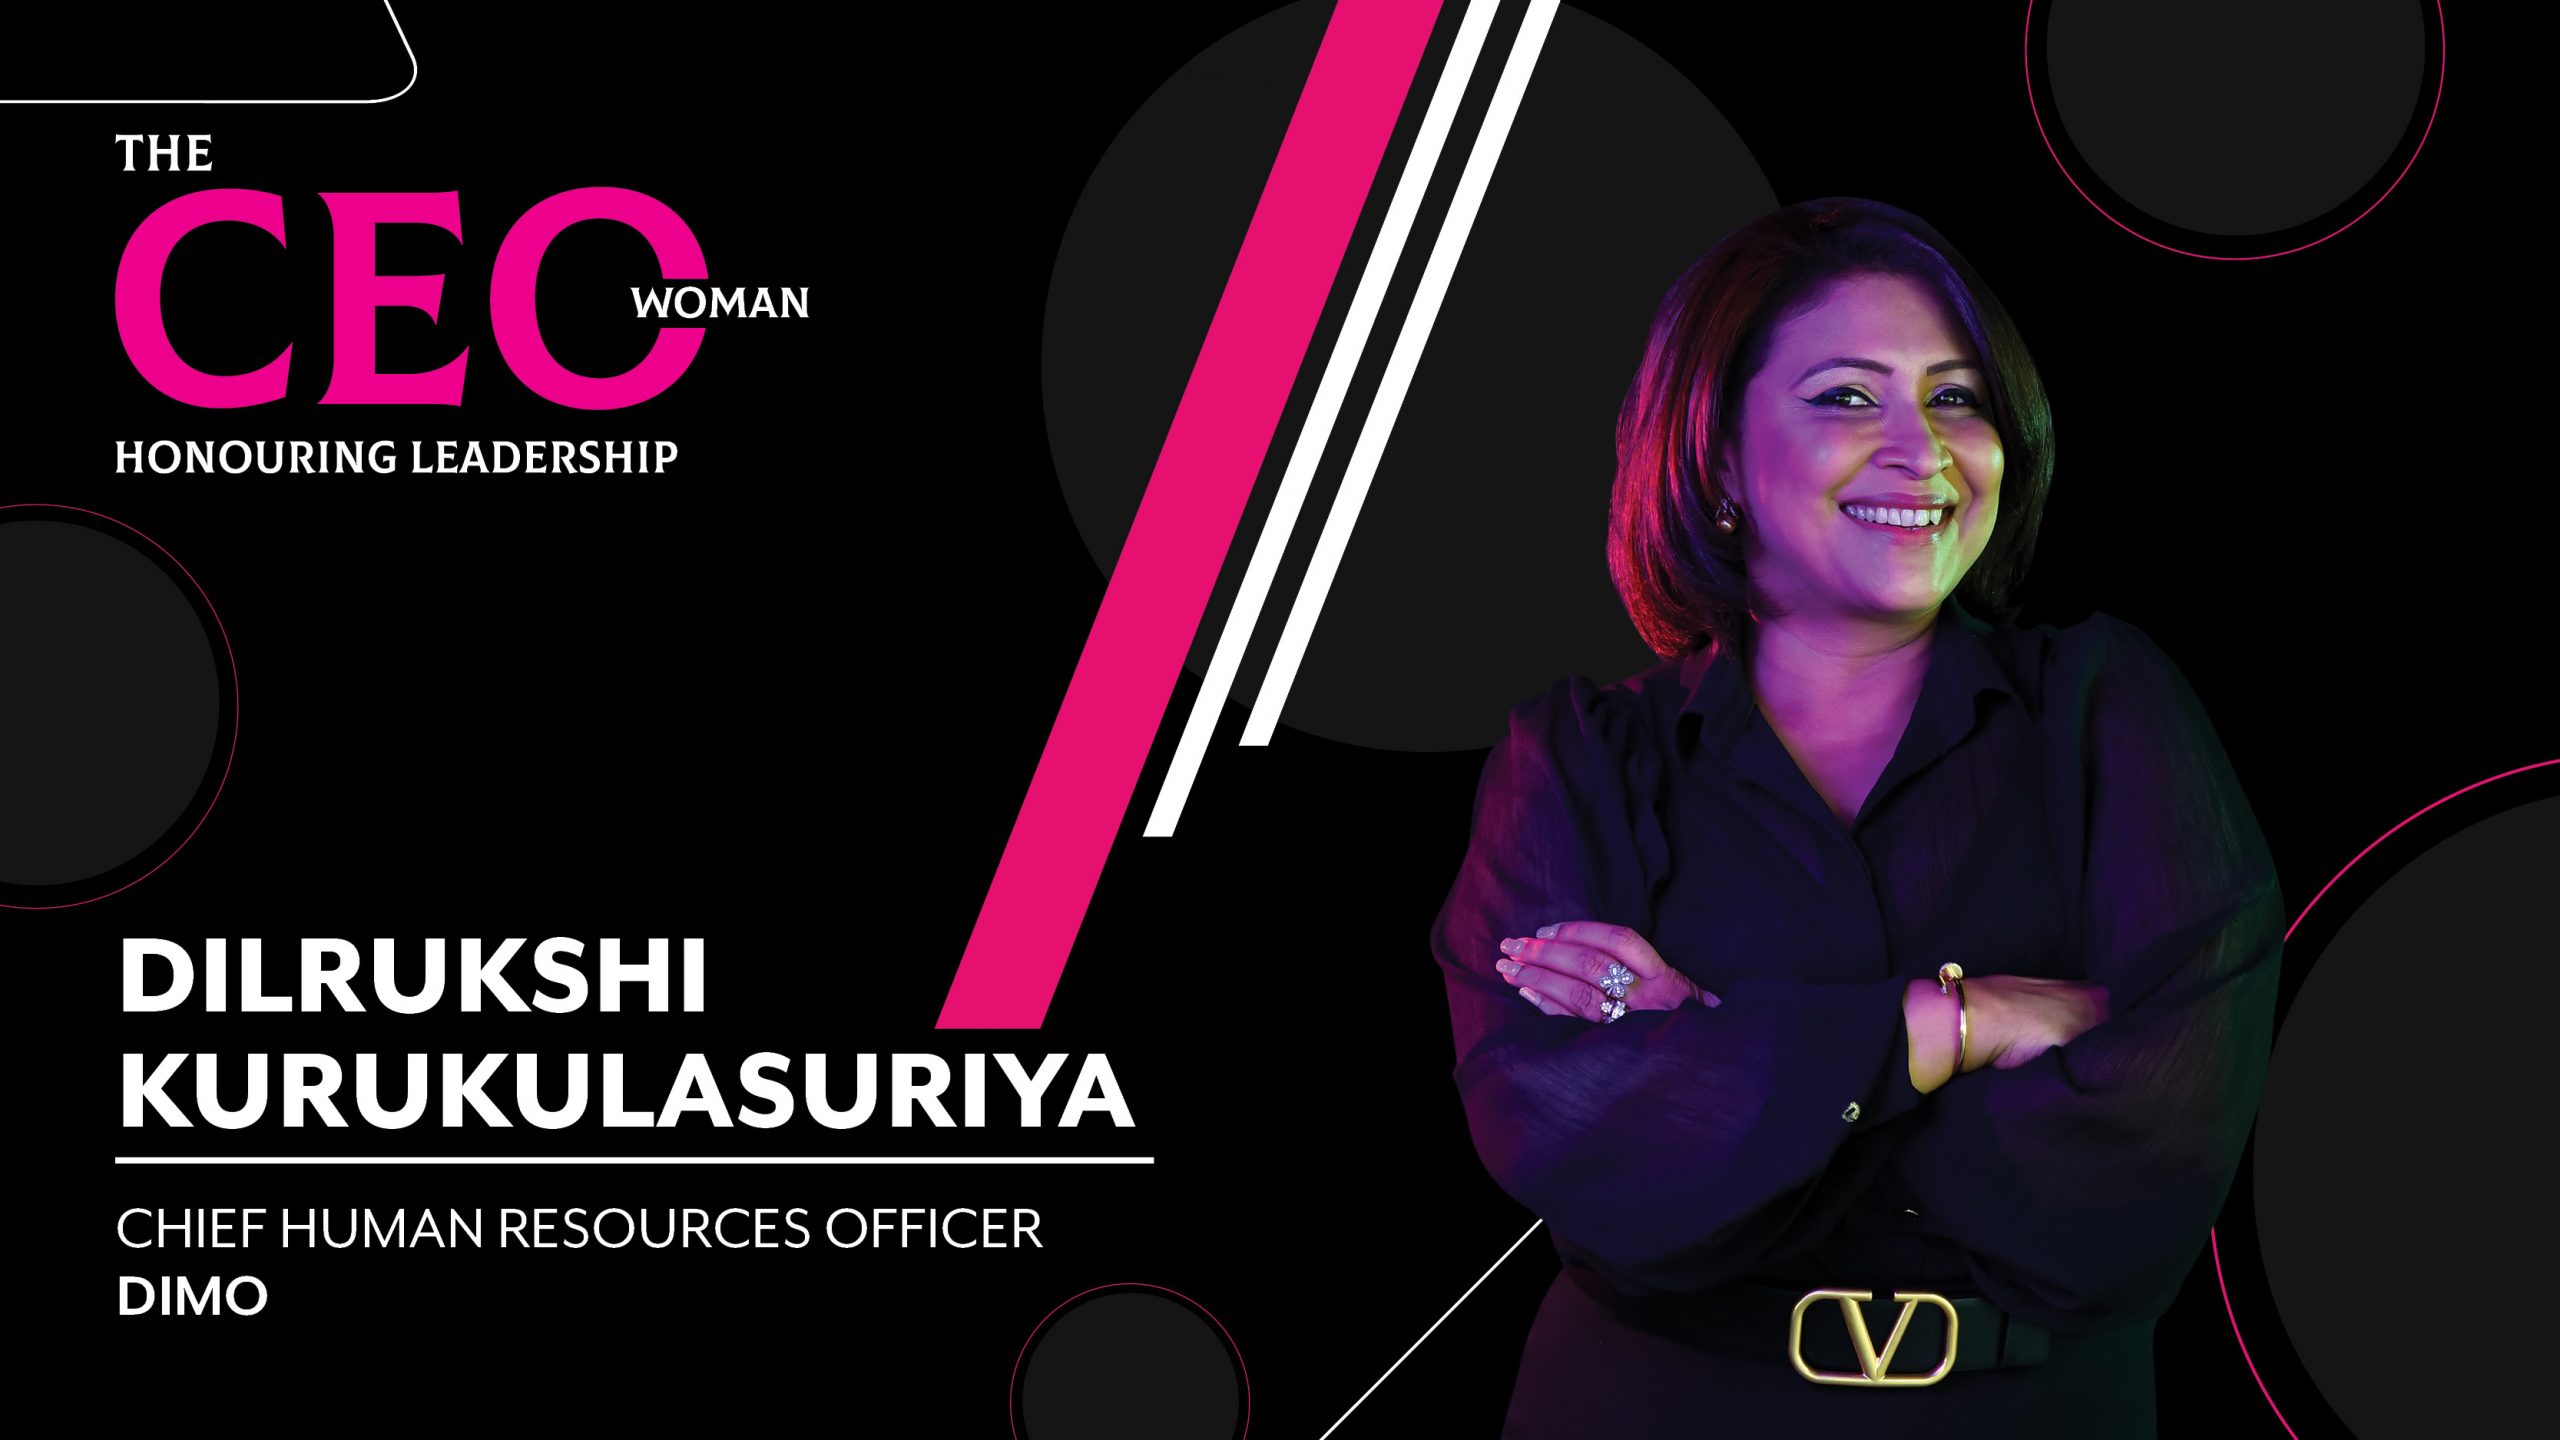 On a Mission with a Thriving Goal – Chief Human Resources Officer at Diesel and Motor Engineering PLC, Dilrukshi Kurukulasuriya